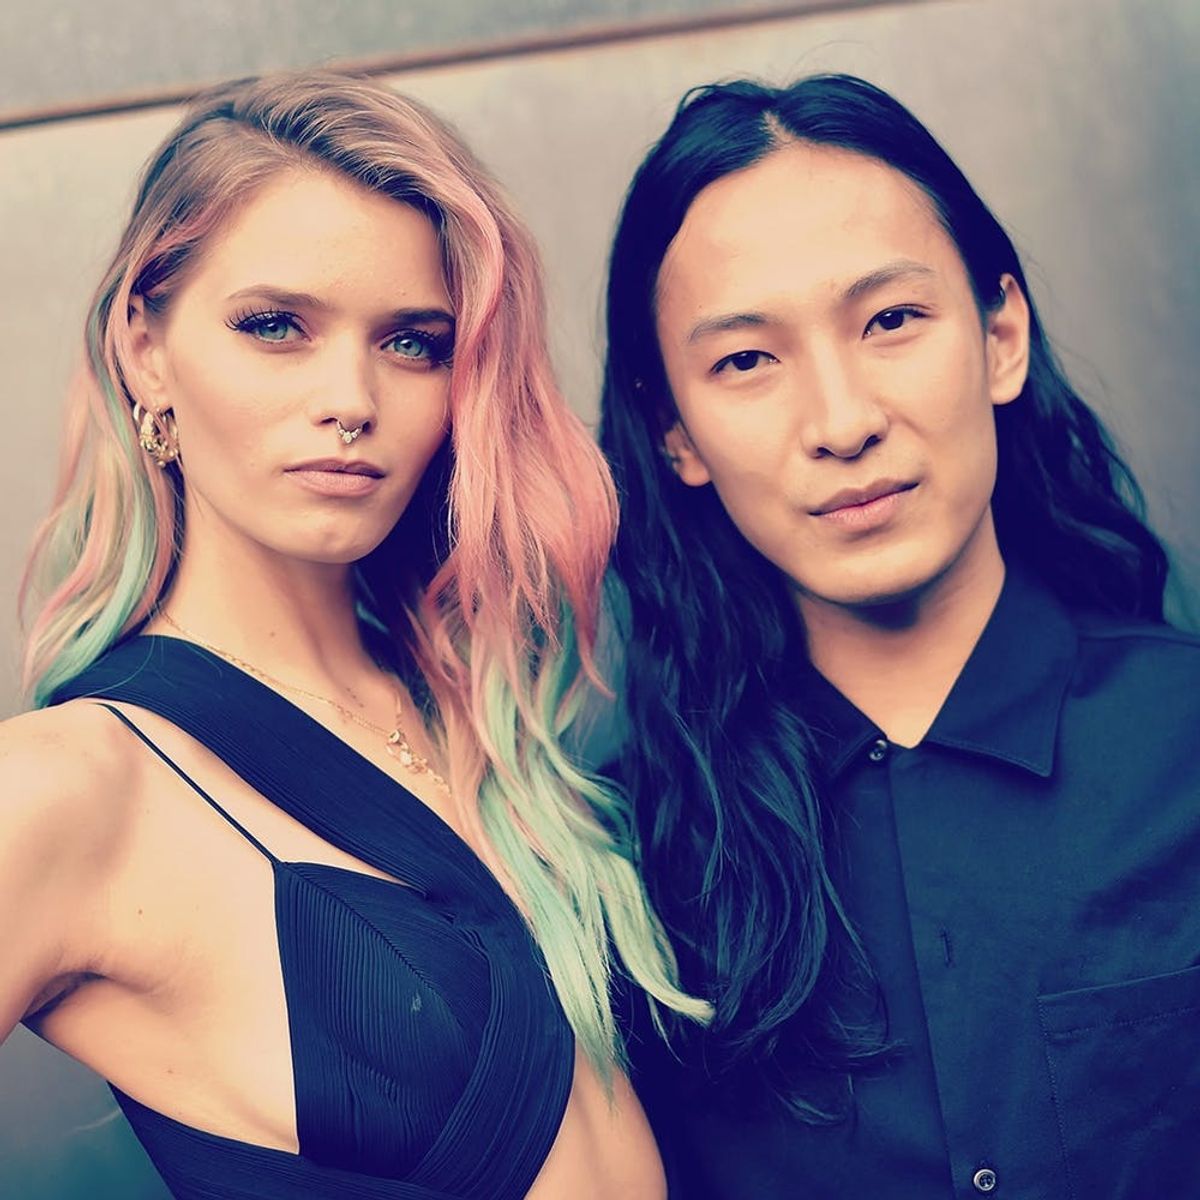 This Model’s My Little Pony Hair Will Give You Serious Rainbow Hair Envy